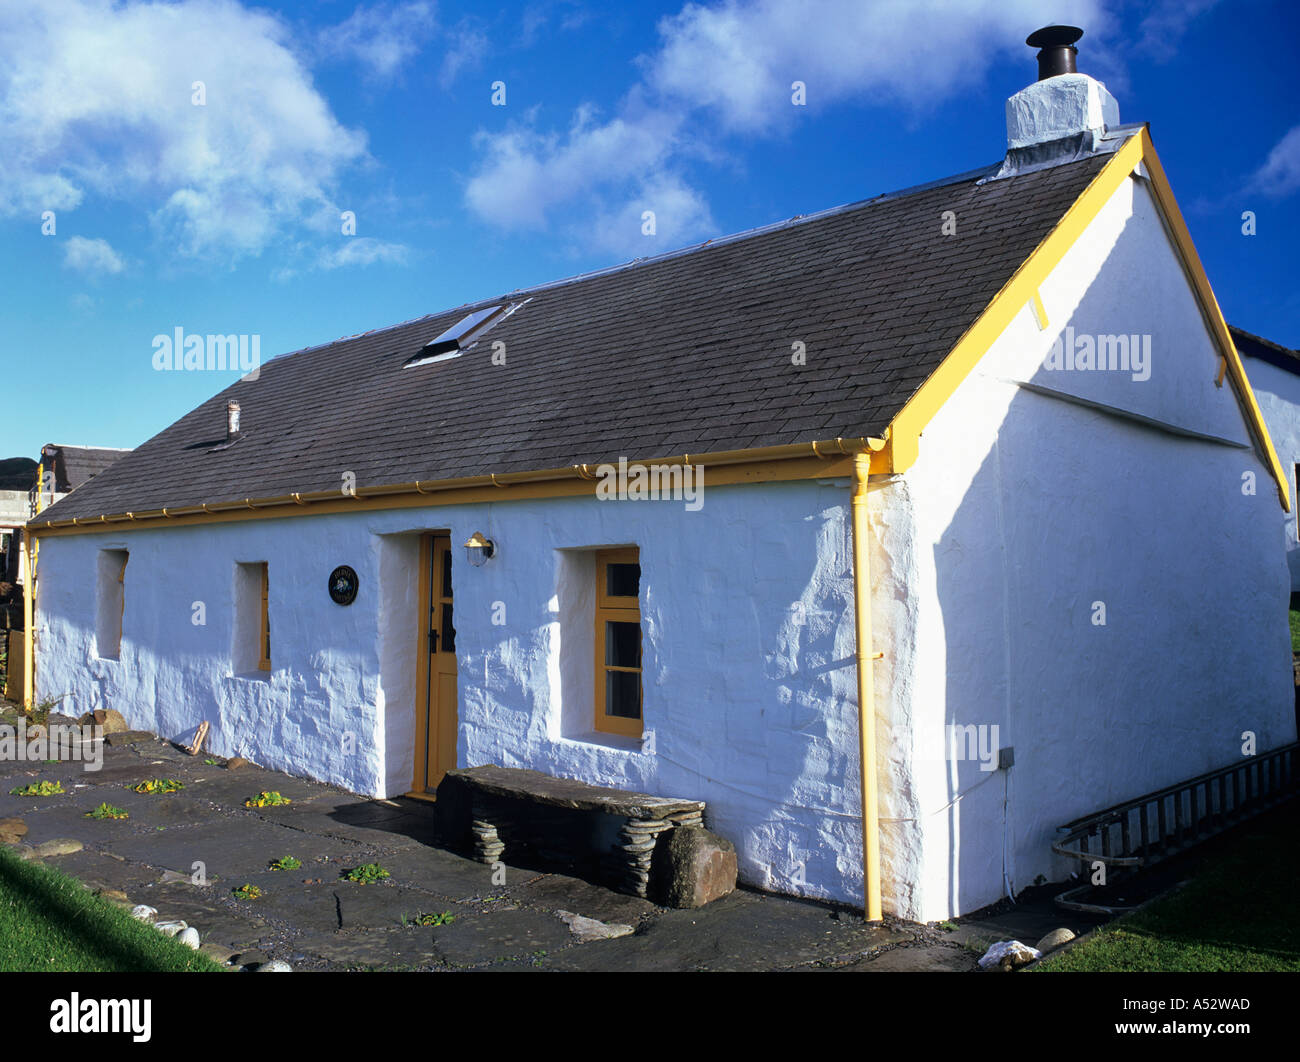 SLATE ROOF on QUARRIERS COTTAGE in Easdale village on Seil Island Argyll & Bute Scotland UK Britain Stock Photo